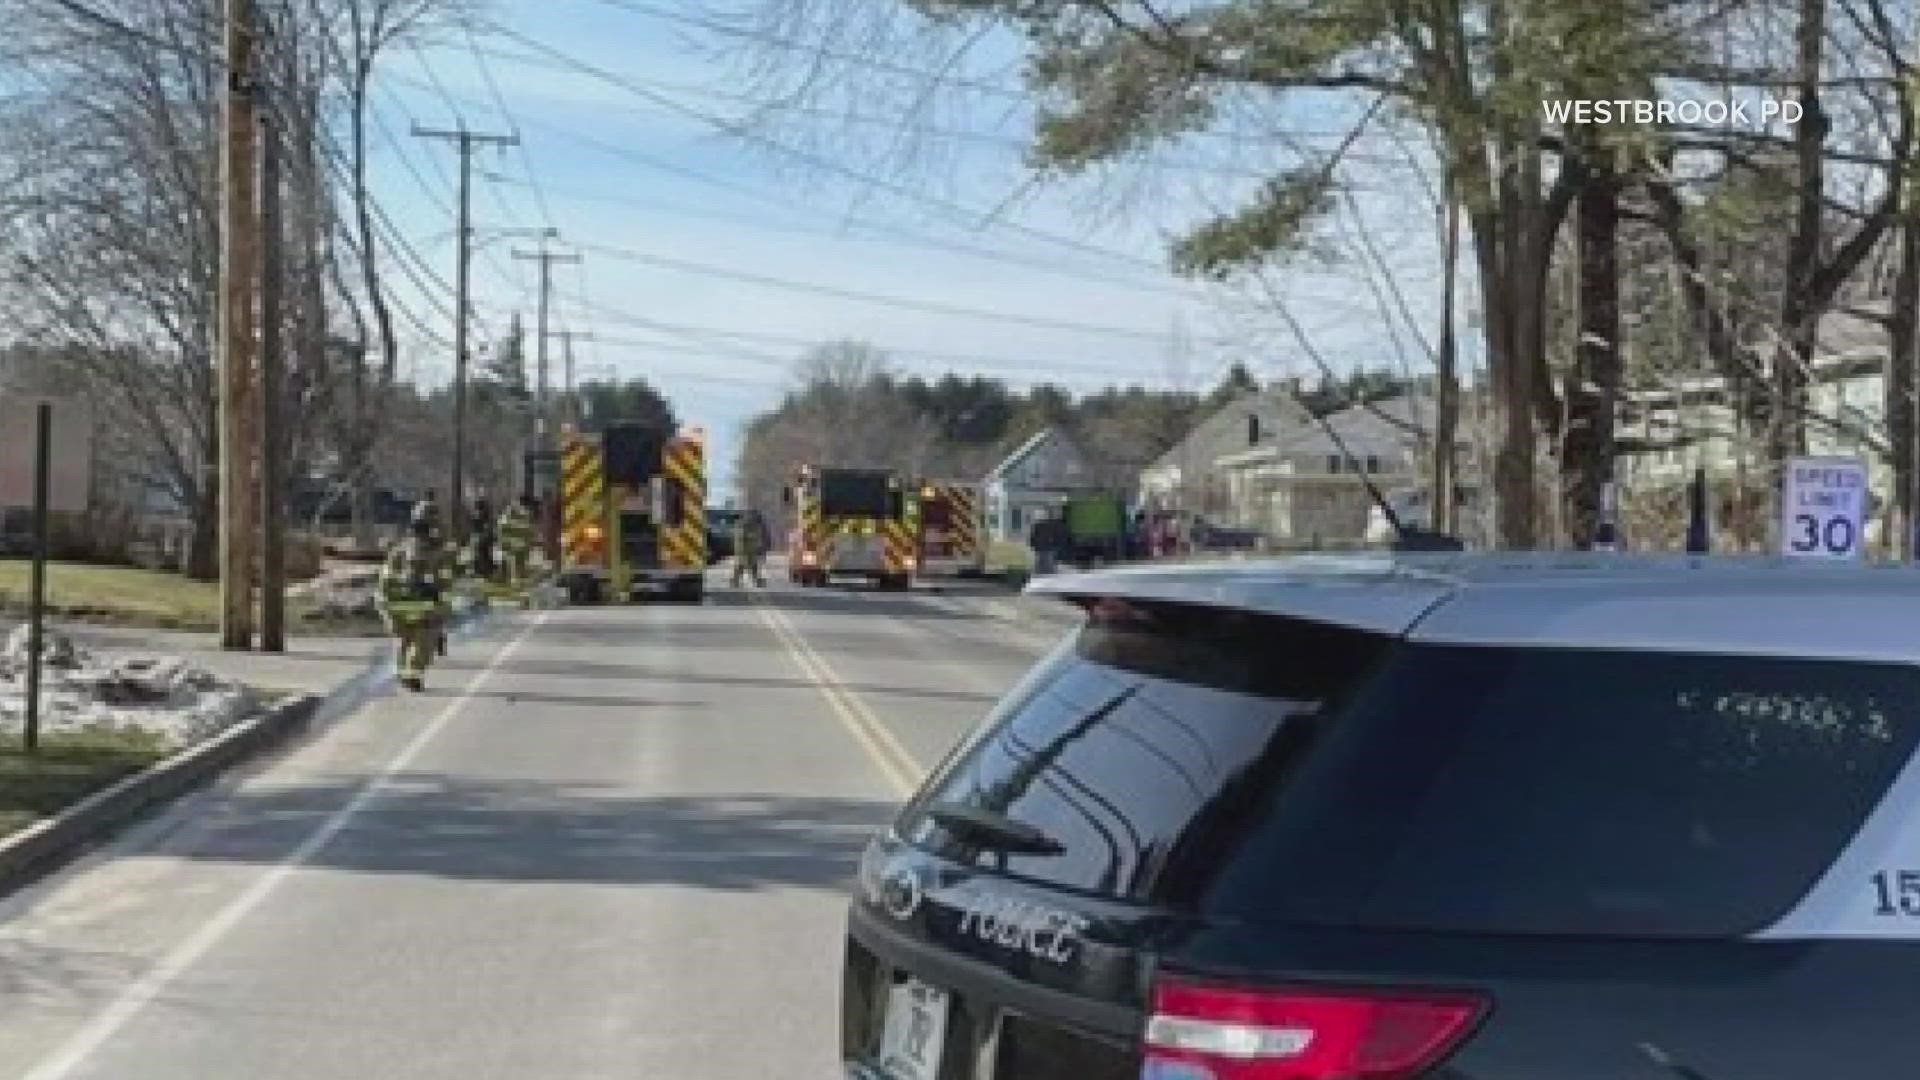 A passerby saw the smoke coming from the home located on New Gorham Road at approximately 2:00 p.m., and alerted police, officials said.